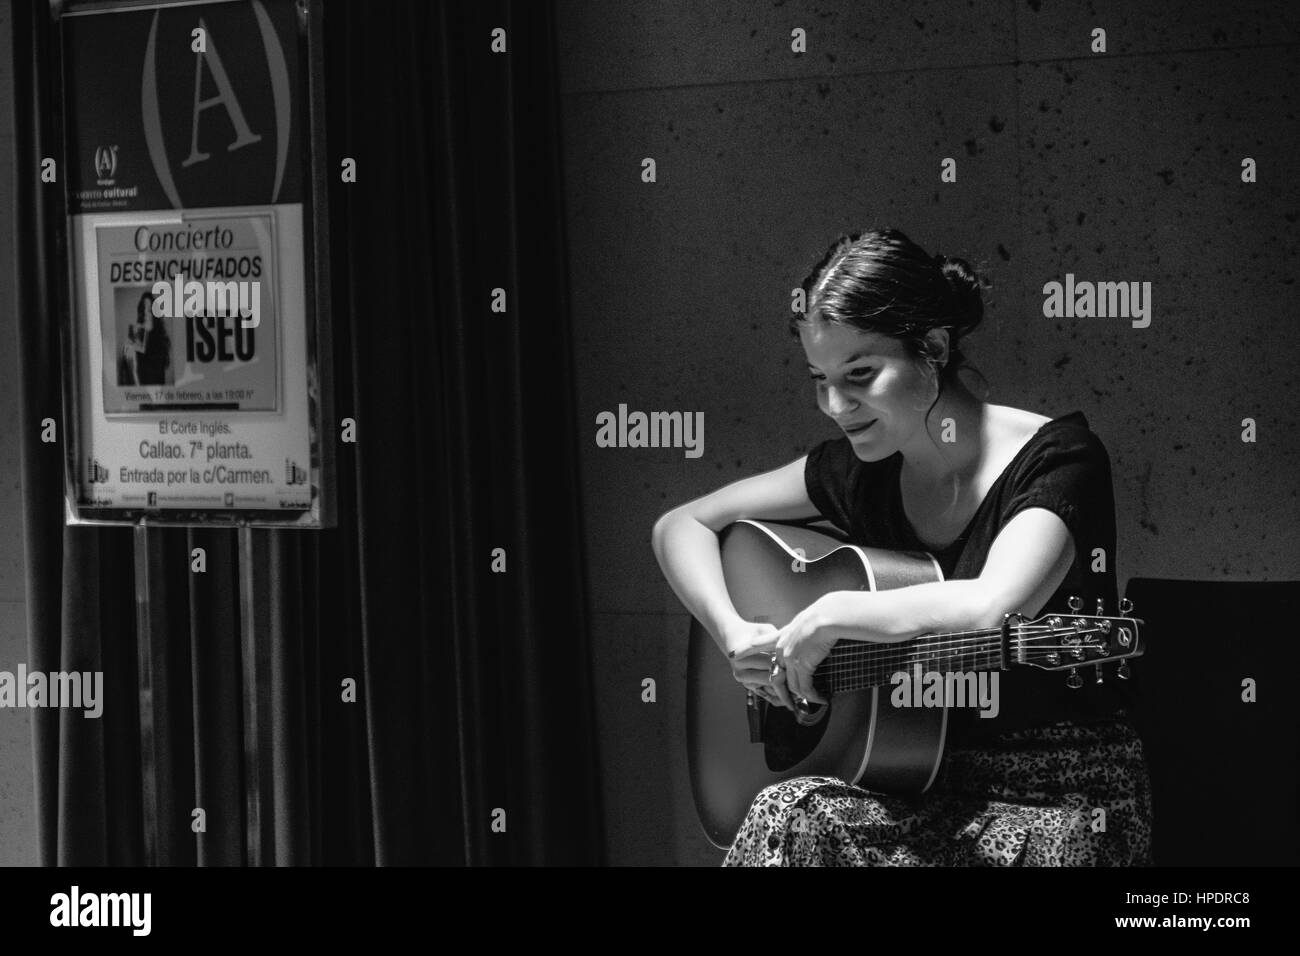 Concert ISEO- A Spanish girl Album Last Night in acoustic playing in Corte Ingles in Madrid - Spain. Only guitar. Stock Photo